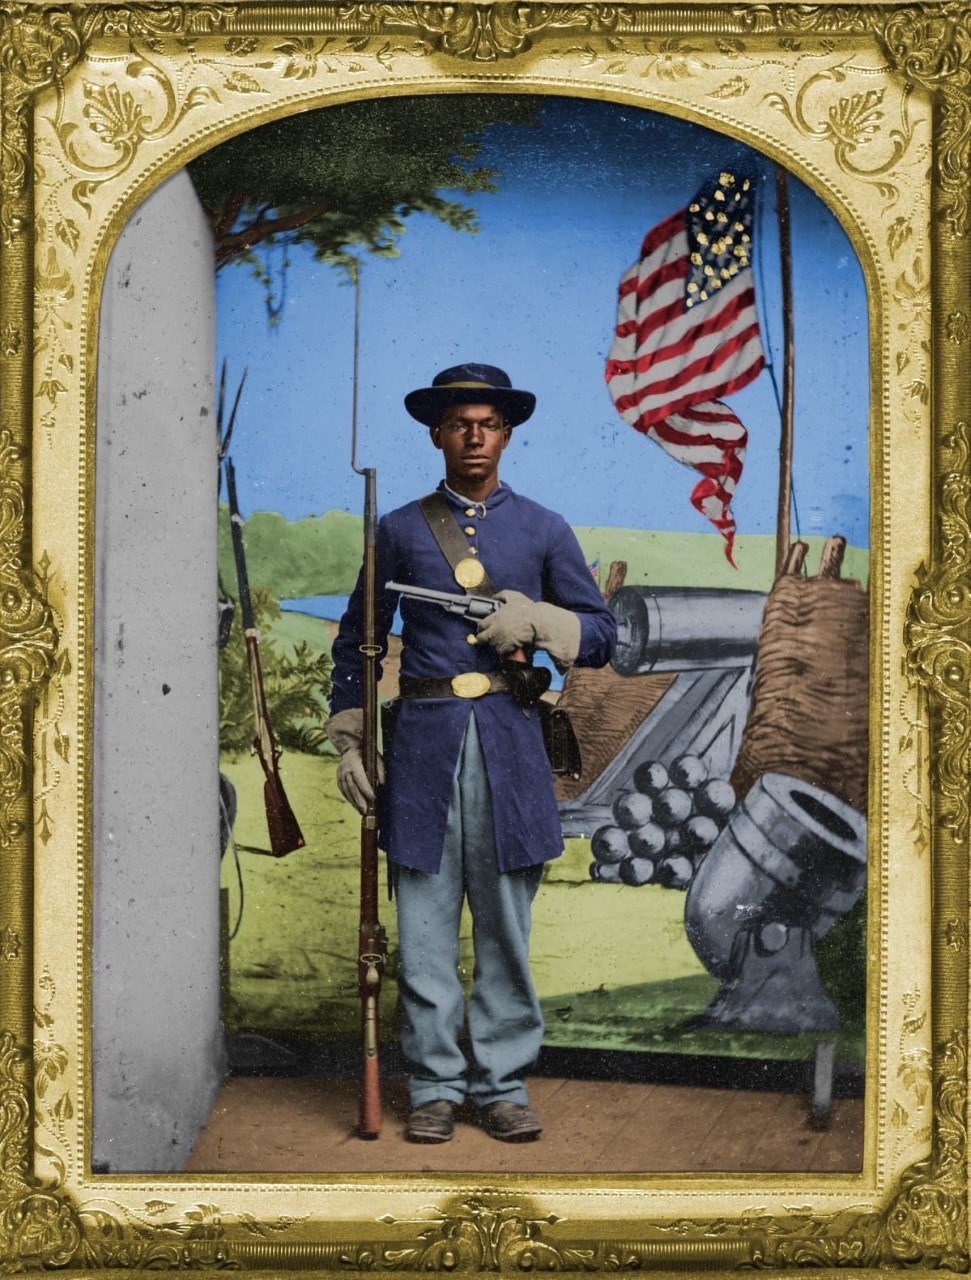 Colorized photo of an African American soldier during the Civil Wear wear coat, pants, and hat while holding two weapons.